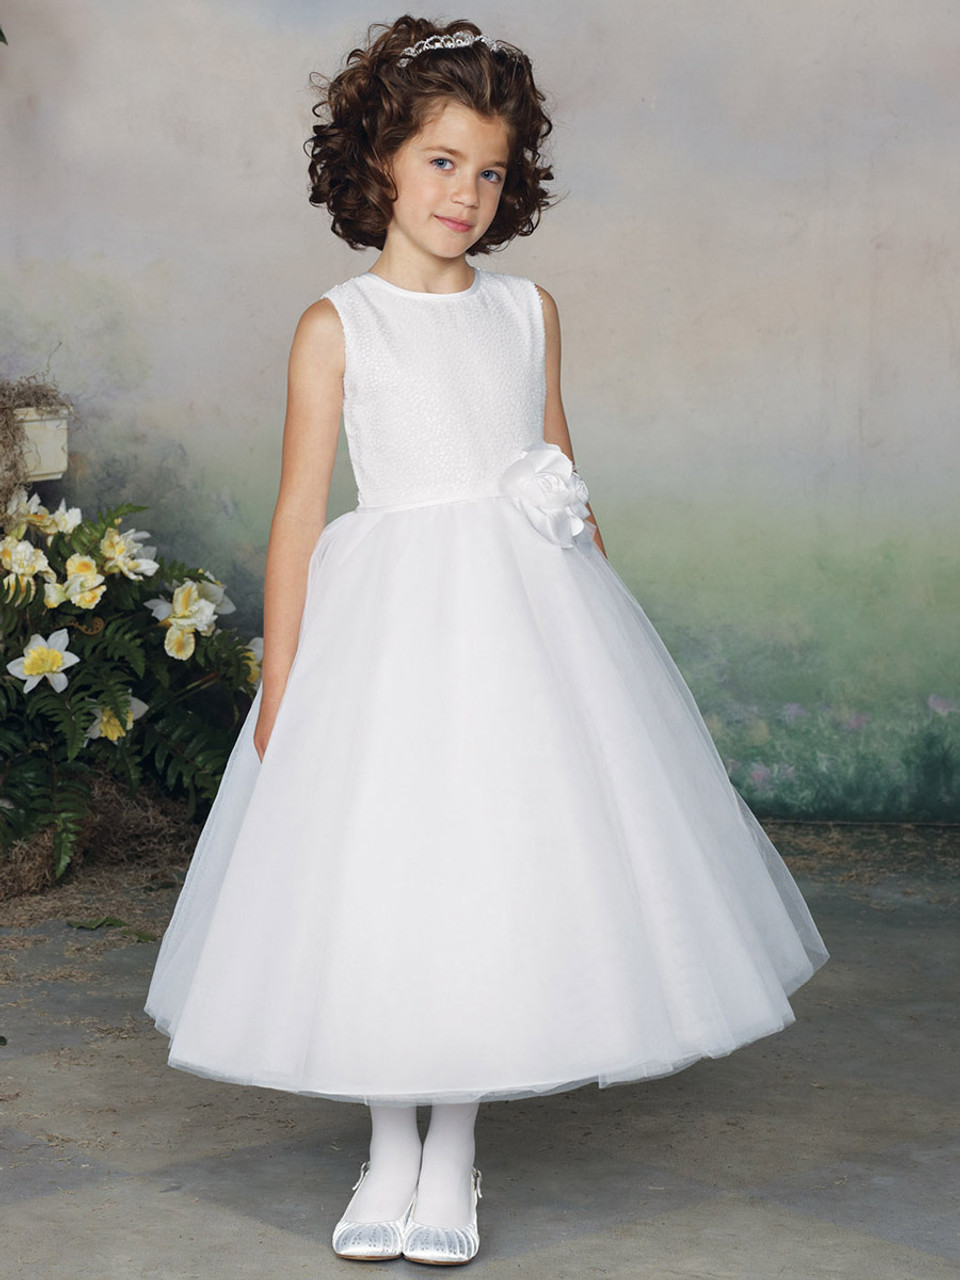 SIZE 4-7 YOUTH GIRLS WHITE PATENT SHOES COMMUNION DRESS PARTY BAPTISM 